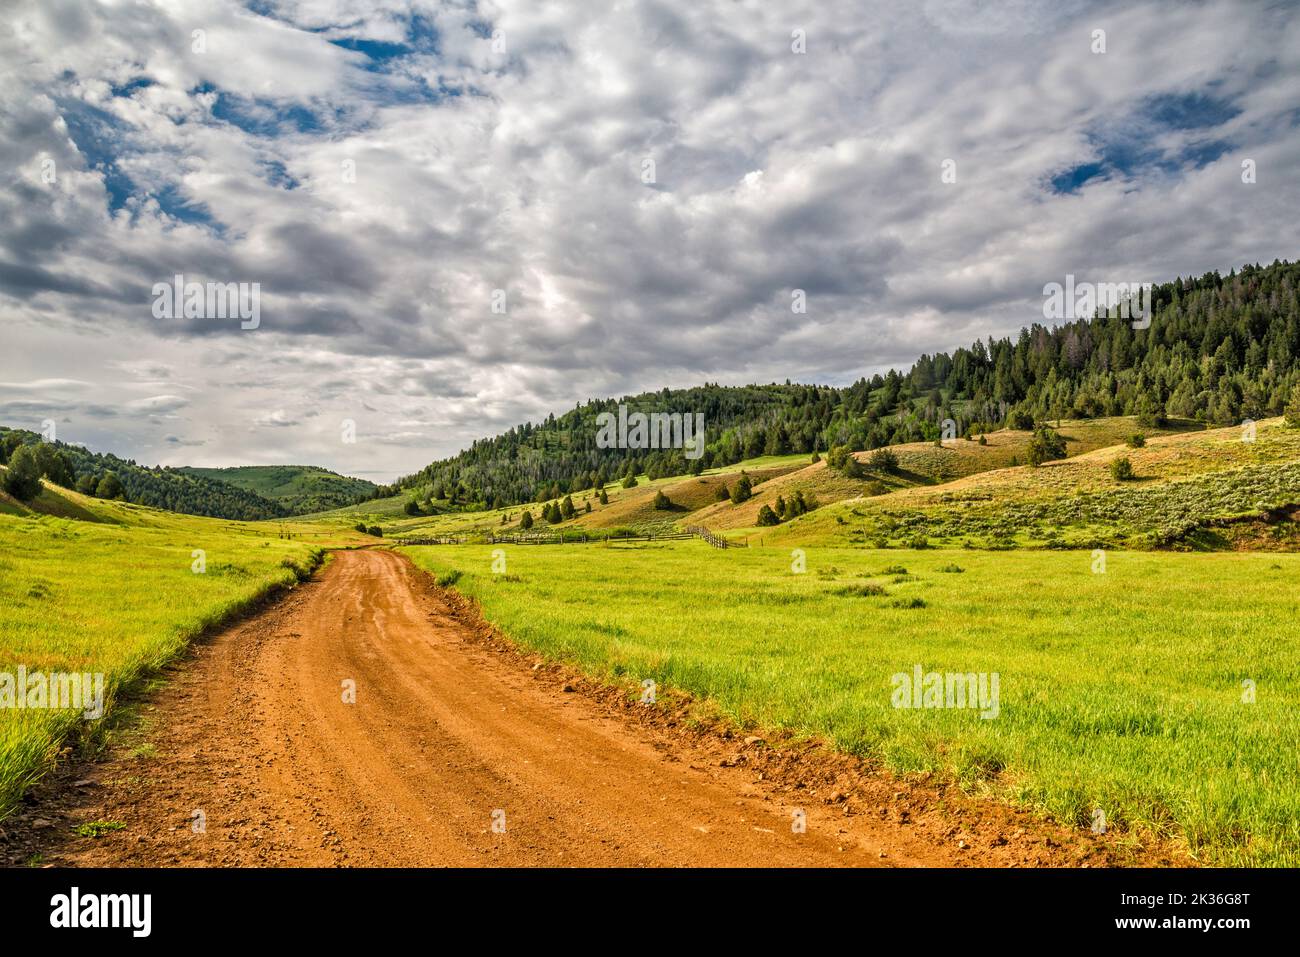 Rees Valley, Chicken Creek Road, FR 101, San Pitch Mountains, Uinta National Forest, Utah, USA Stock Photo